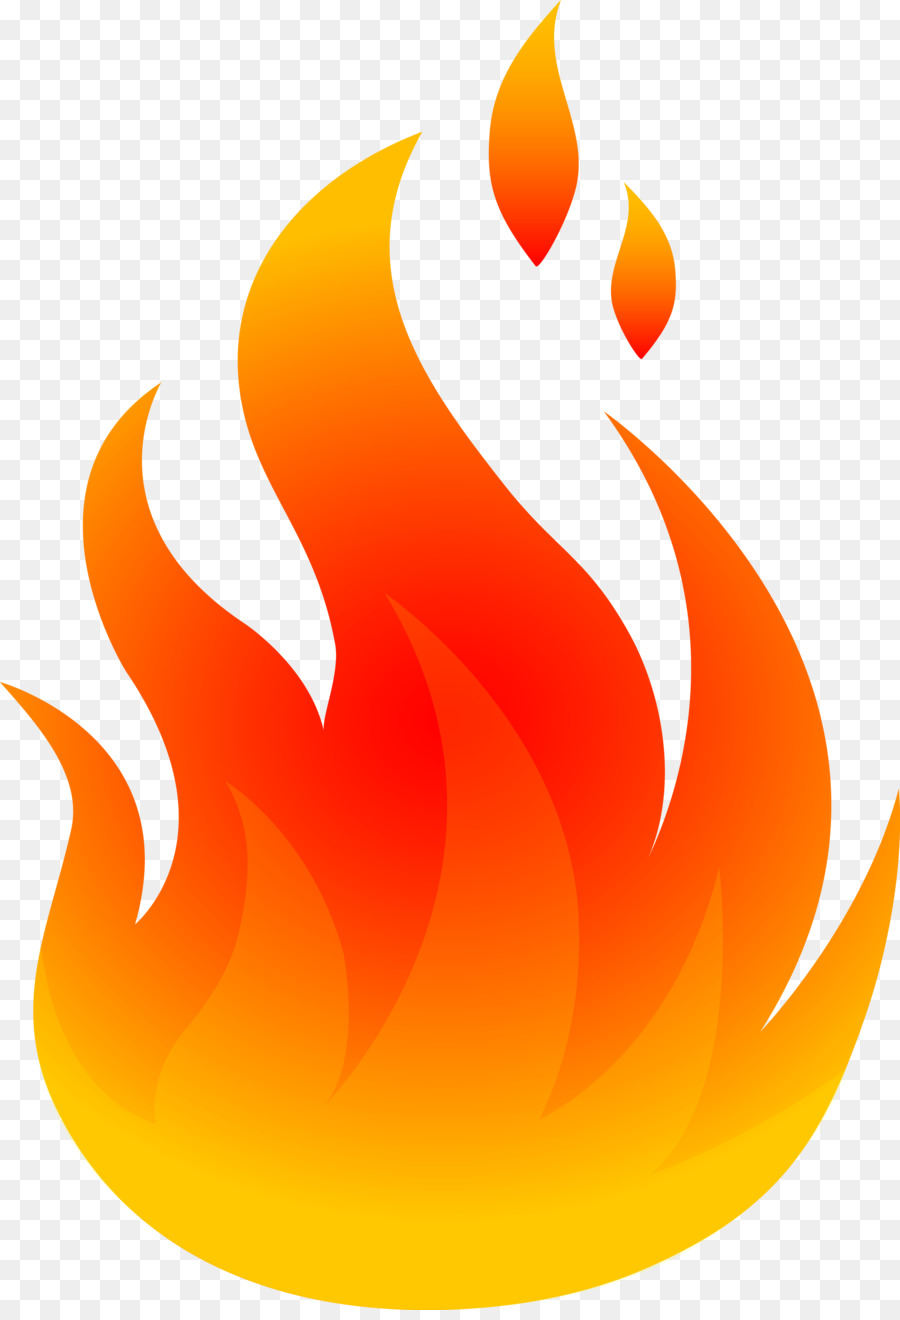 Fire Flame Clip art - Realistic Flame Cliparts png download - 4830*7029 - Free Transparent Fire png Download.